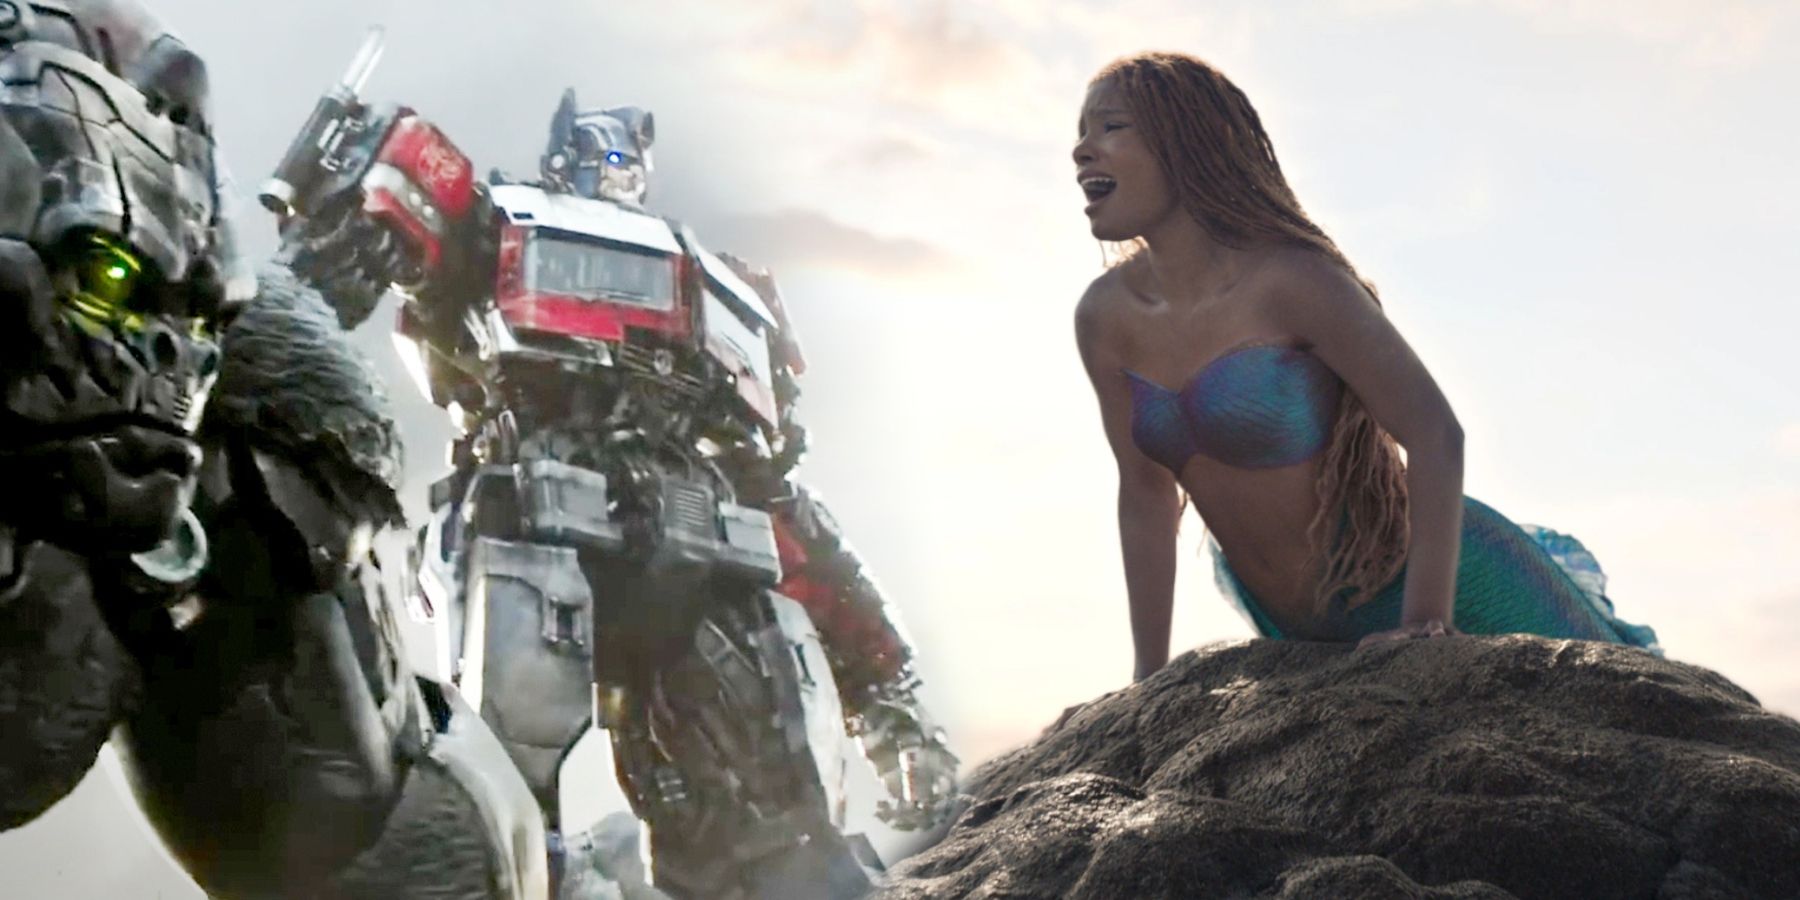 Transformers Rise of the Beasts and The Little Mermaid trailer images